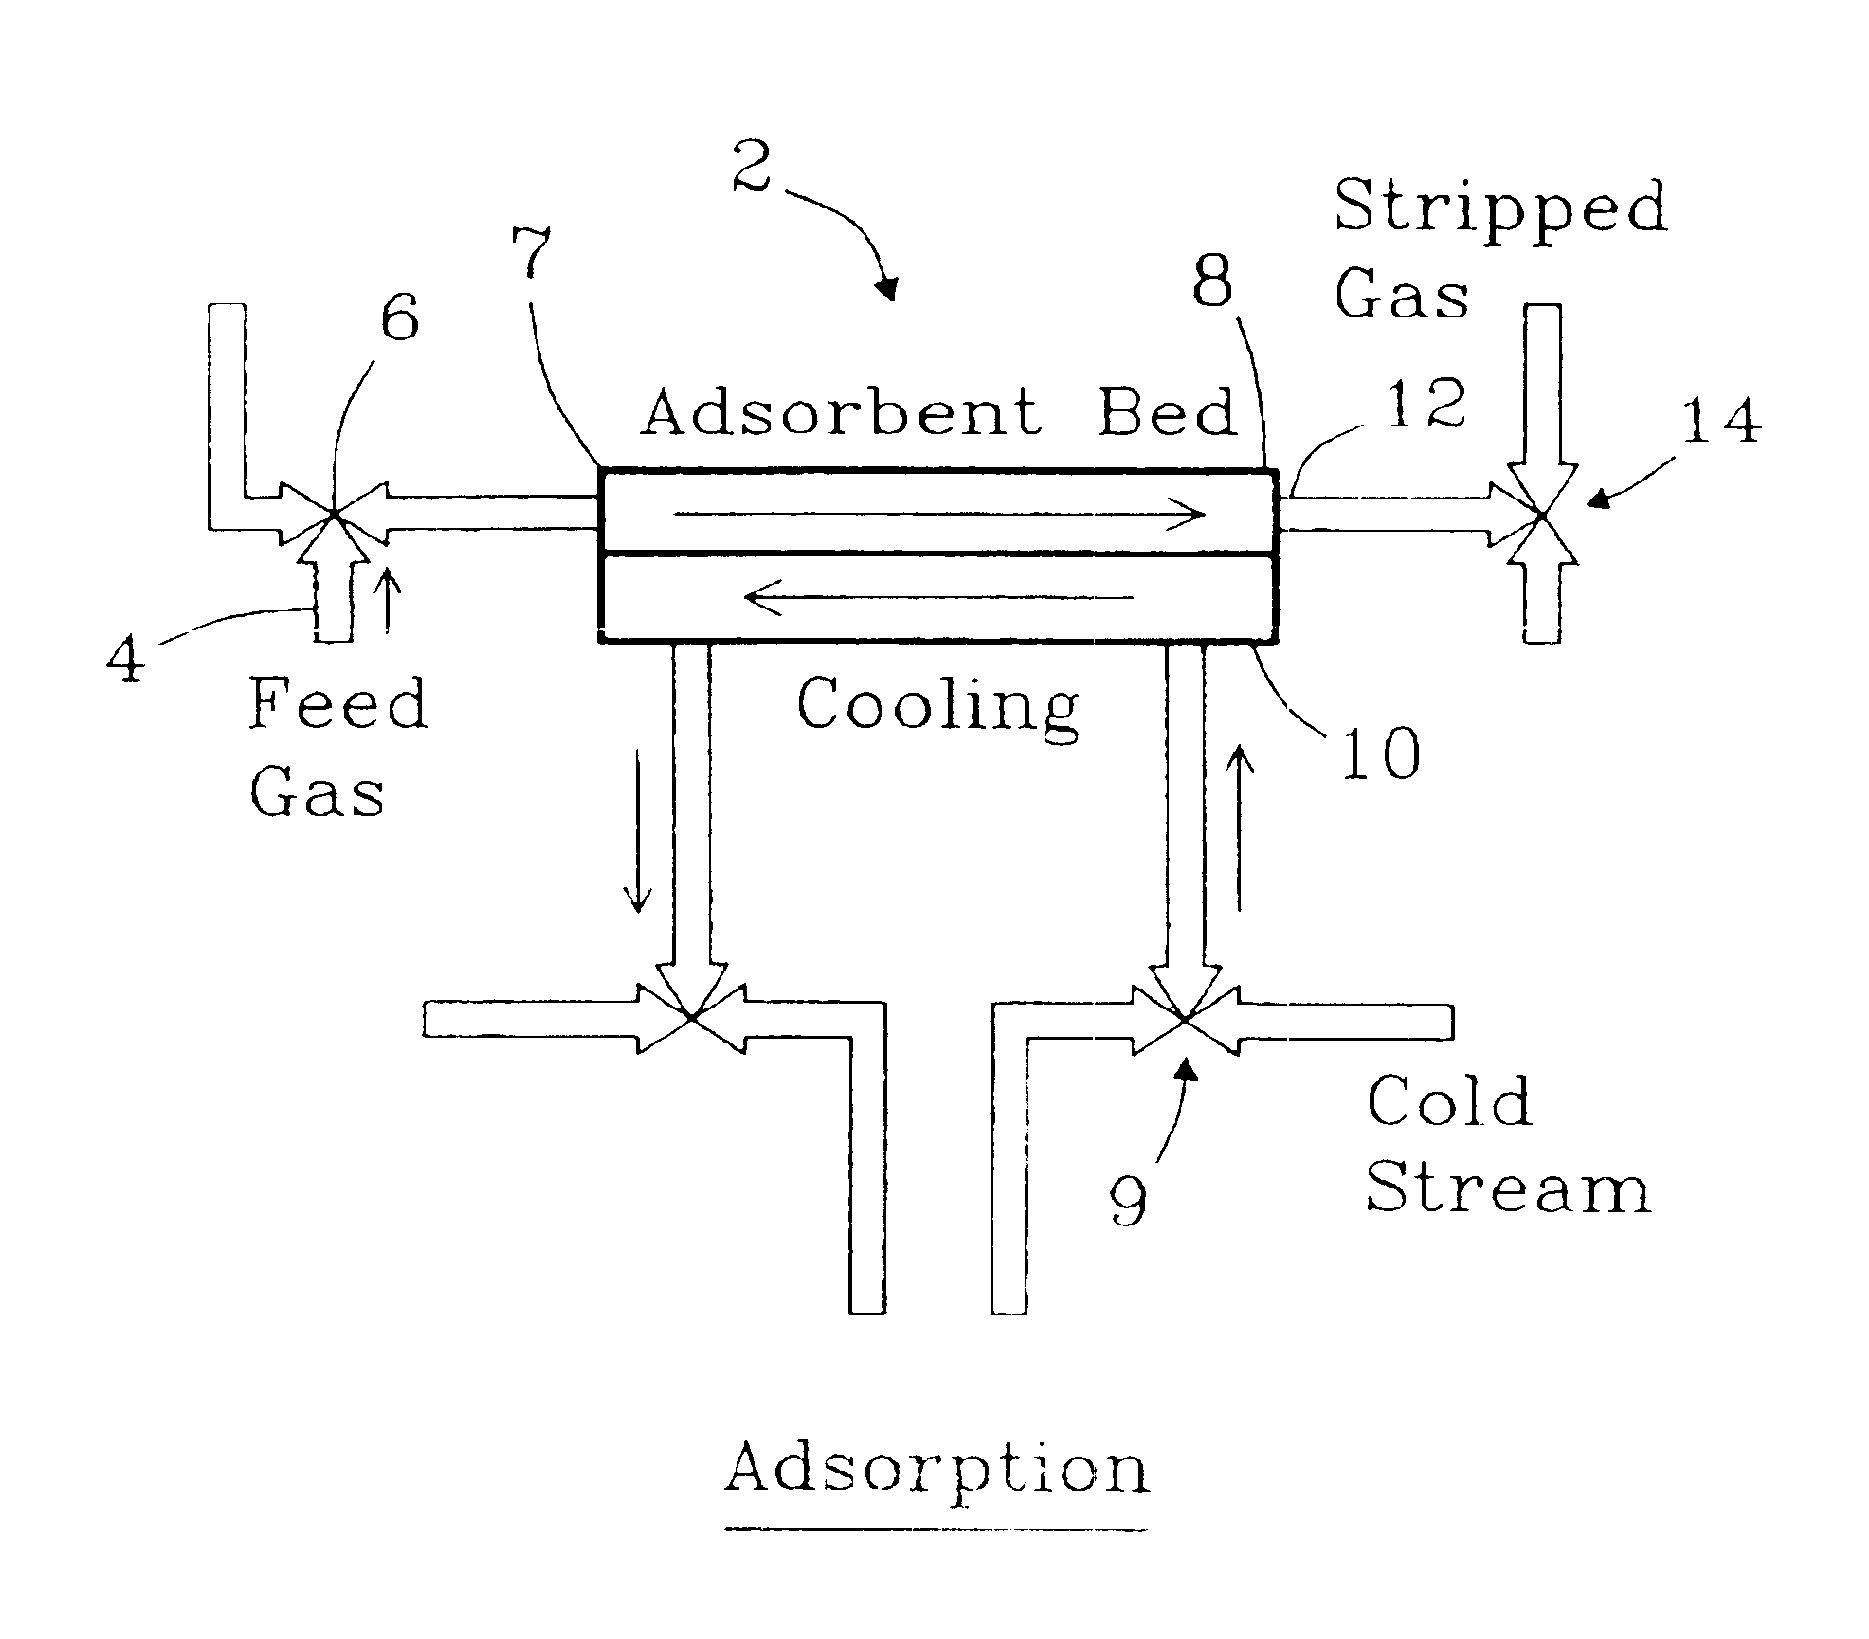 Apparatus for thermal swing adsorption and thermally-enhanced pressure swing adsorption